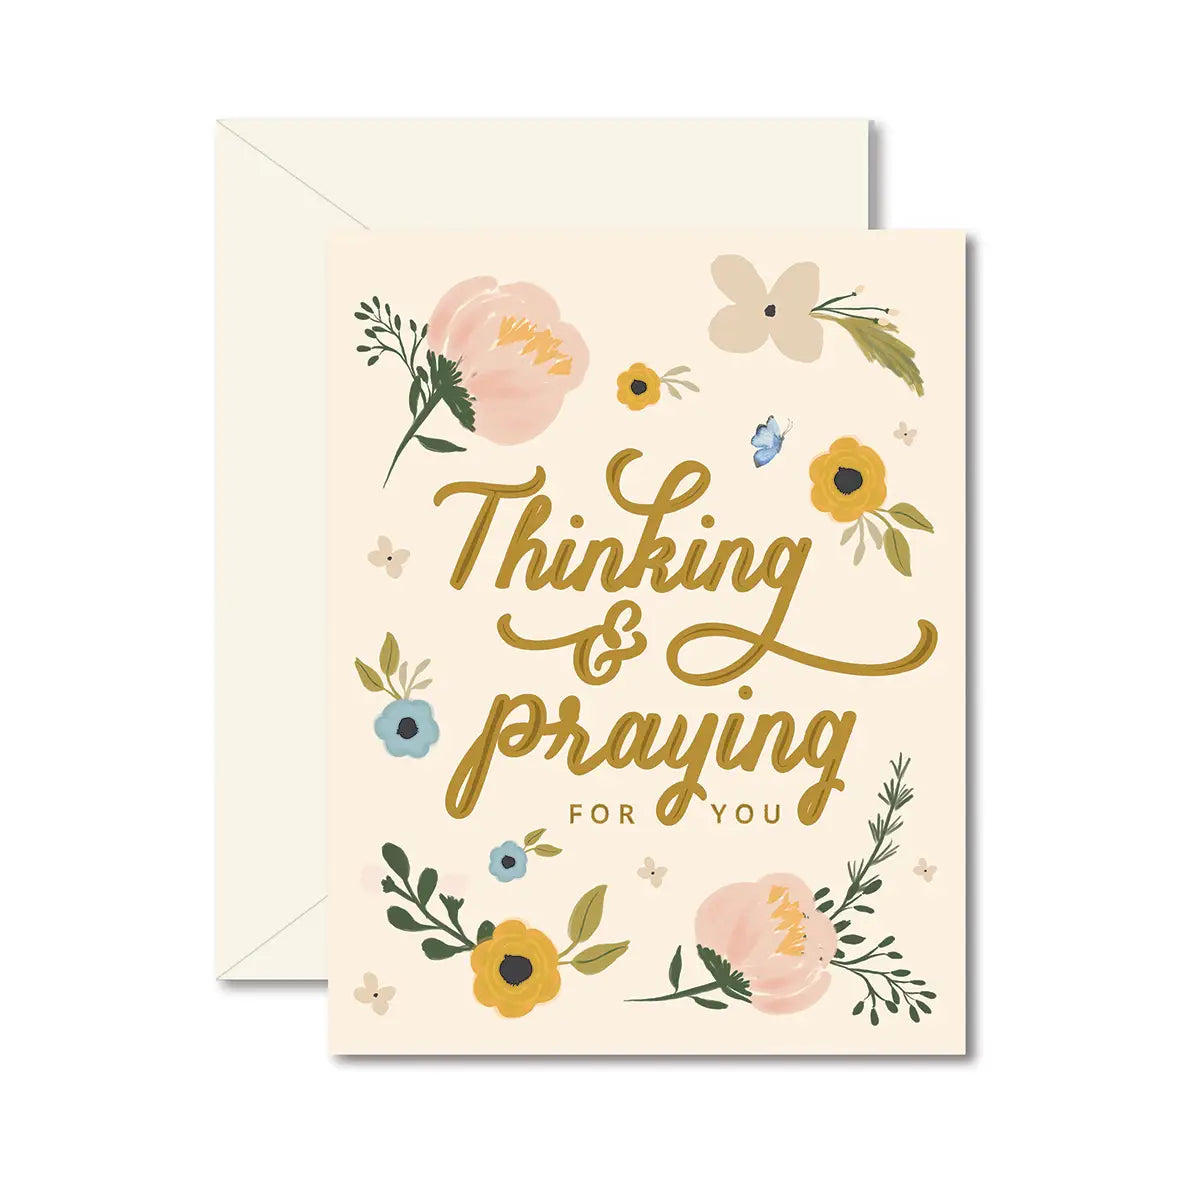 Thinking and Praying For You Sympathy Card